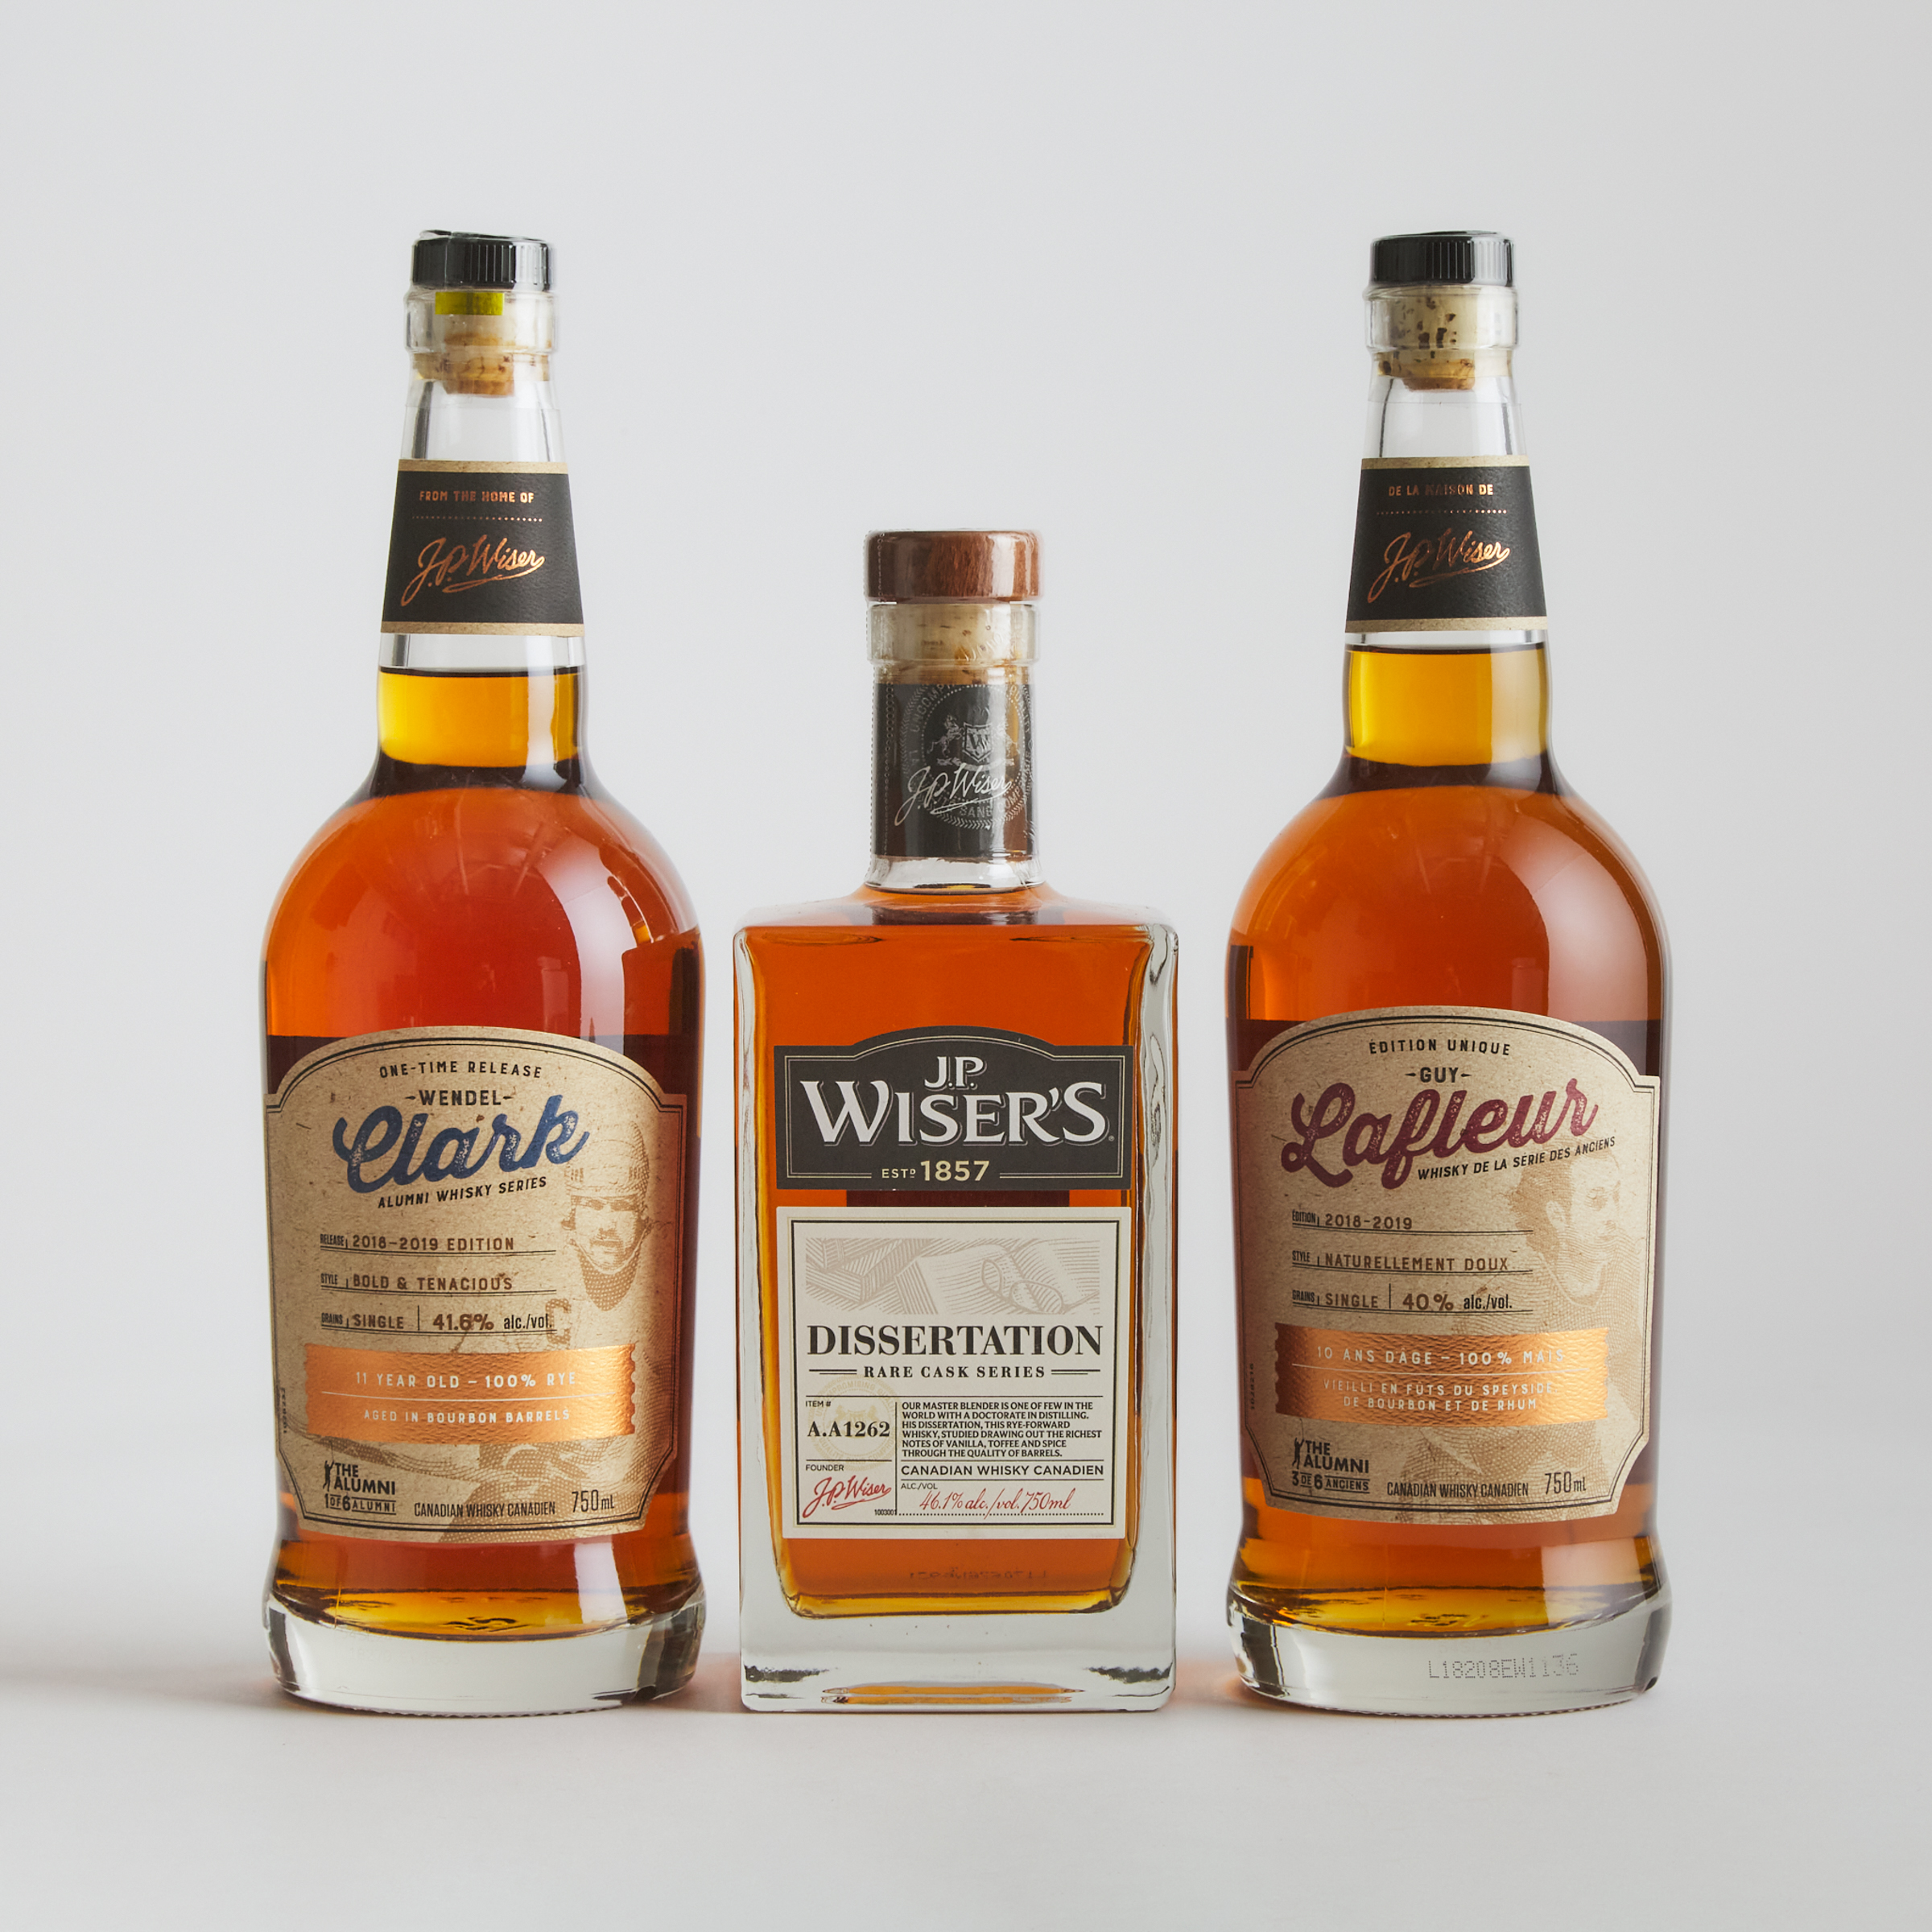 J.P. WISER'S BLENDED CANADIAN WHISKY 10 YEARS (ONE 750 ML)
J.P. WISER'S BLENDED CANADIAN WHISKY 11 YEARS (ONE 750 ML)
J.P. WISER'S BLENDED CANADIAN WHISKY (ONE 750 ML)